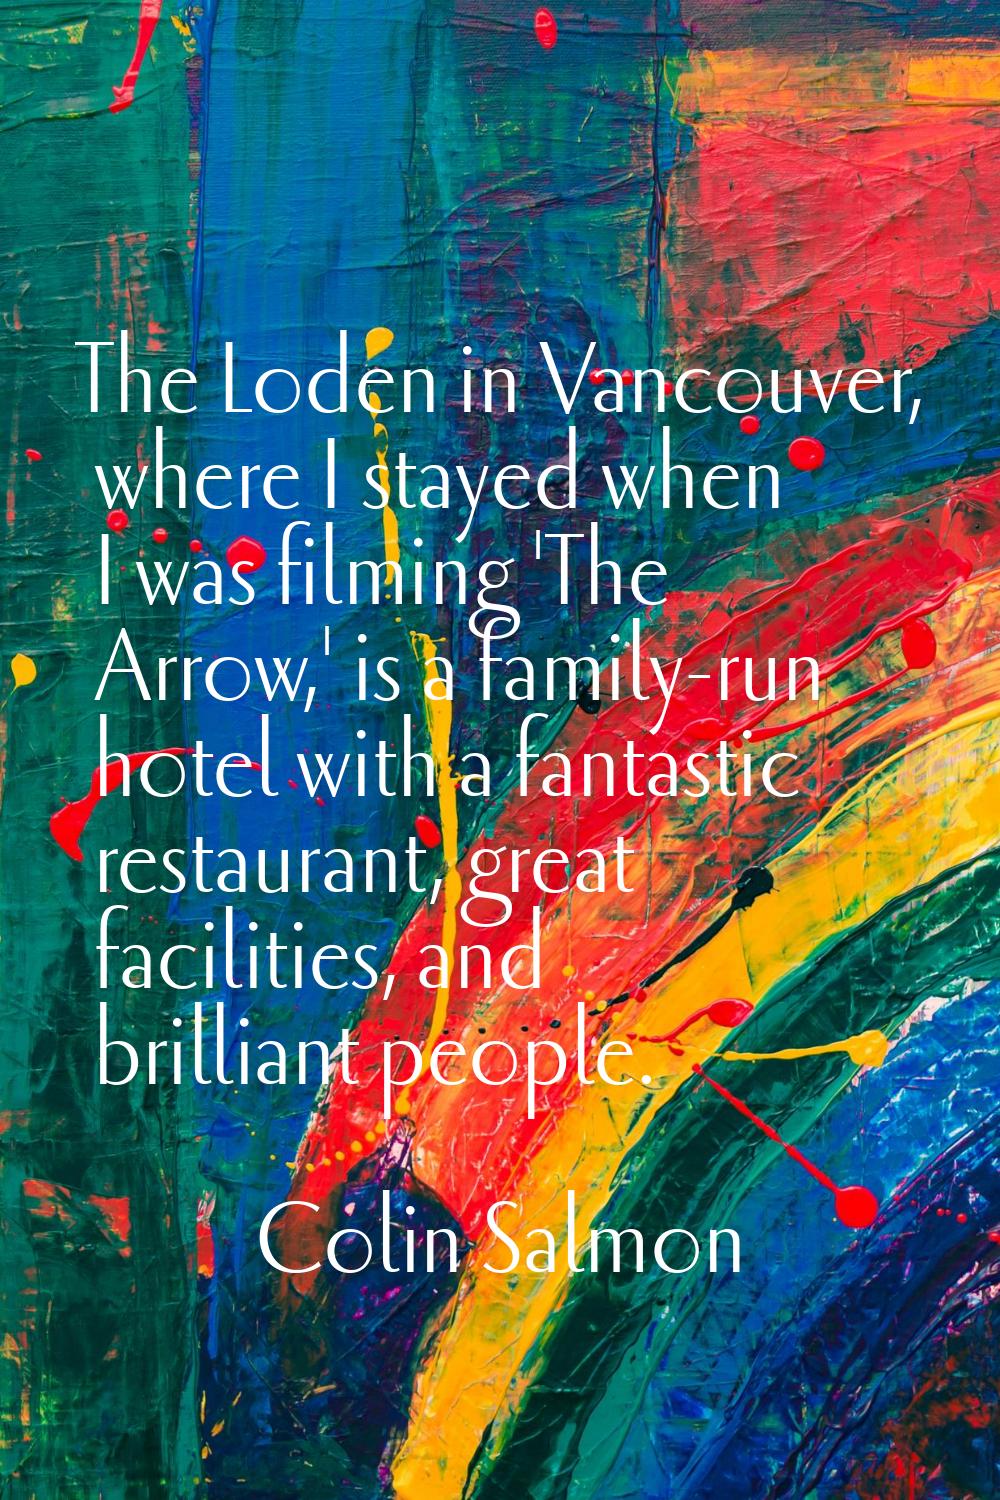 The Loden in Vancouver, where I stayed when I was filming 'The Arrow,' is a family-run hotel with a